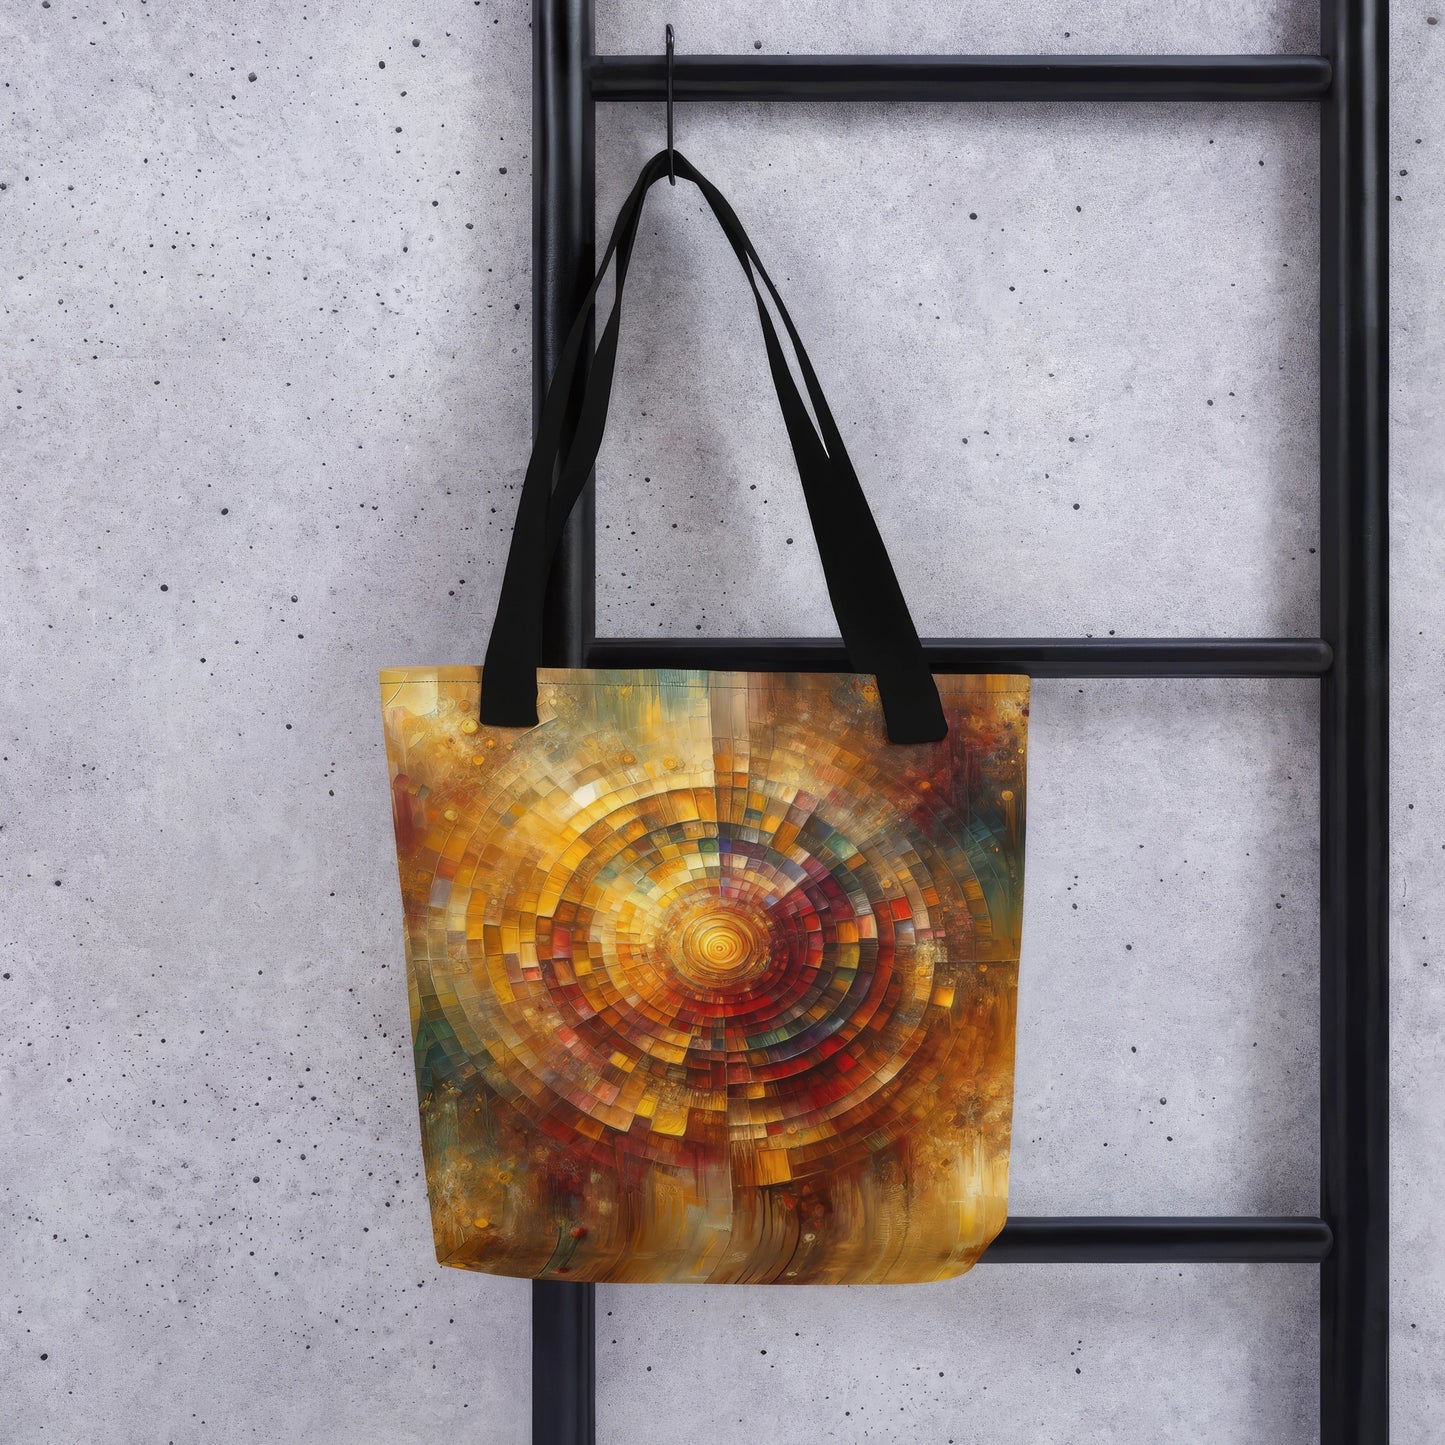 Abstract Art Tote Bag: Echoes of Gratitude